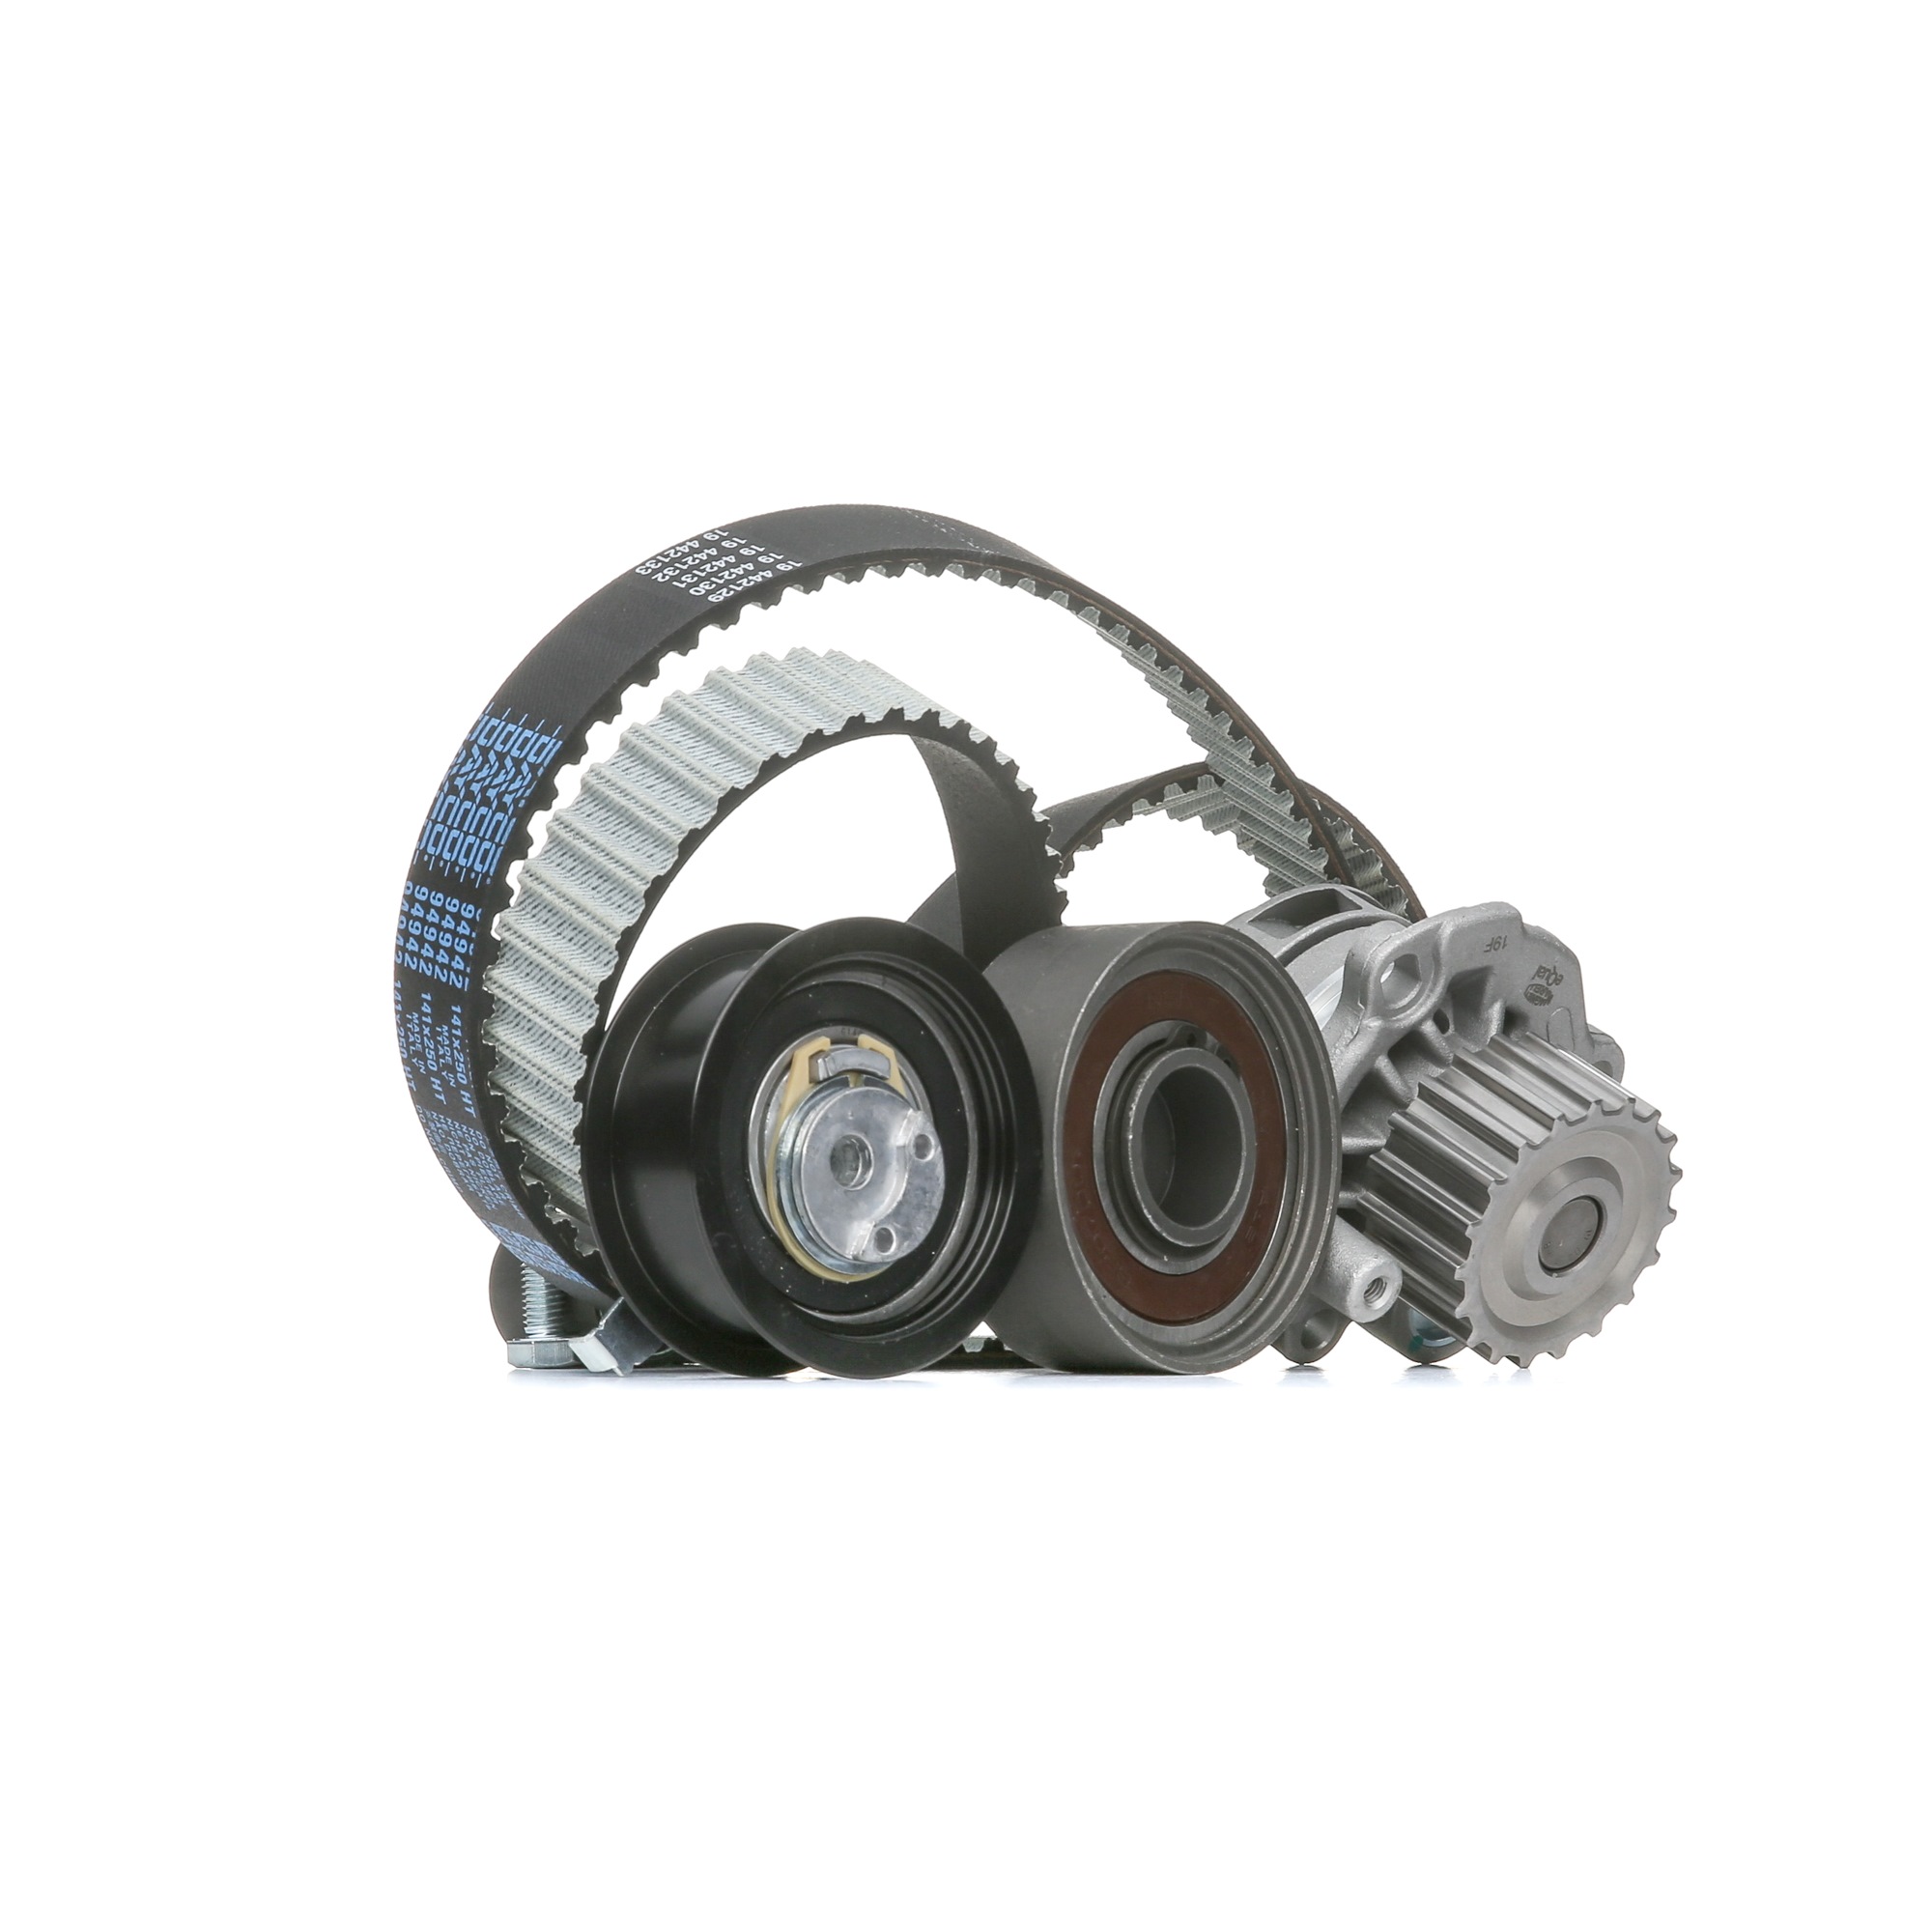 MAGNETI MARELLI 132011160037 Water pump and timing belt kit Number of Teeth: 141 L: 1343 mm, Width: 25 mm